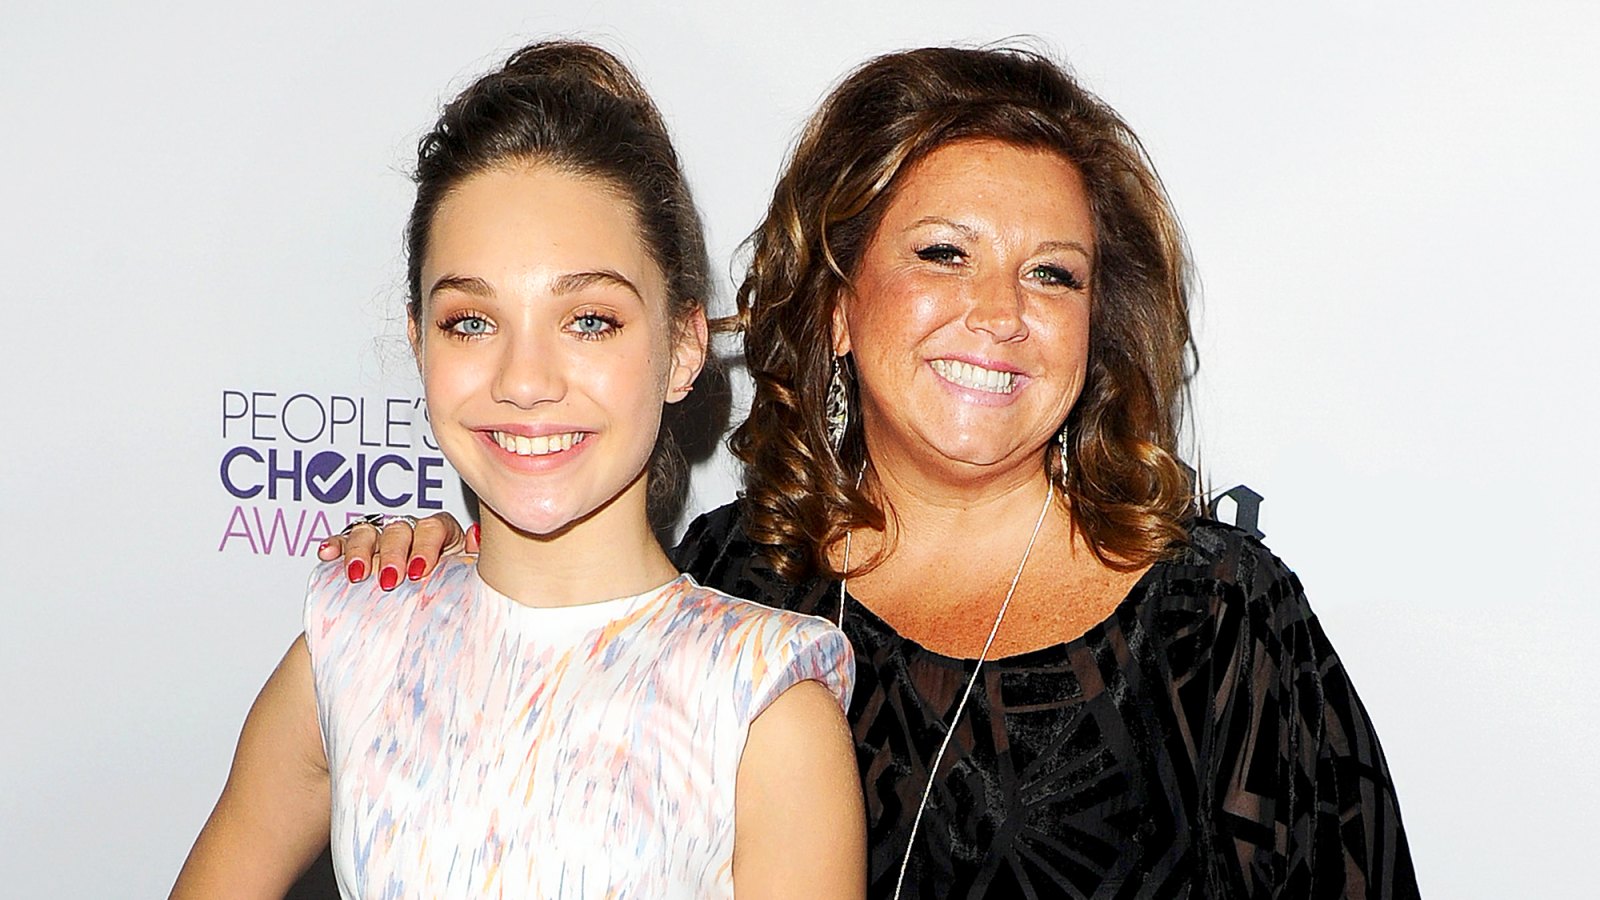 Maddie Ziegler and Abby Lee Miller attend after party for 2016 People's Choice Awards at Club Nokia in Los Angeles, California.